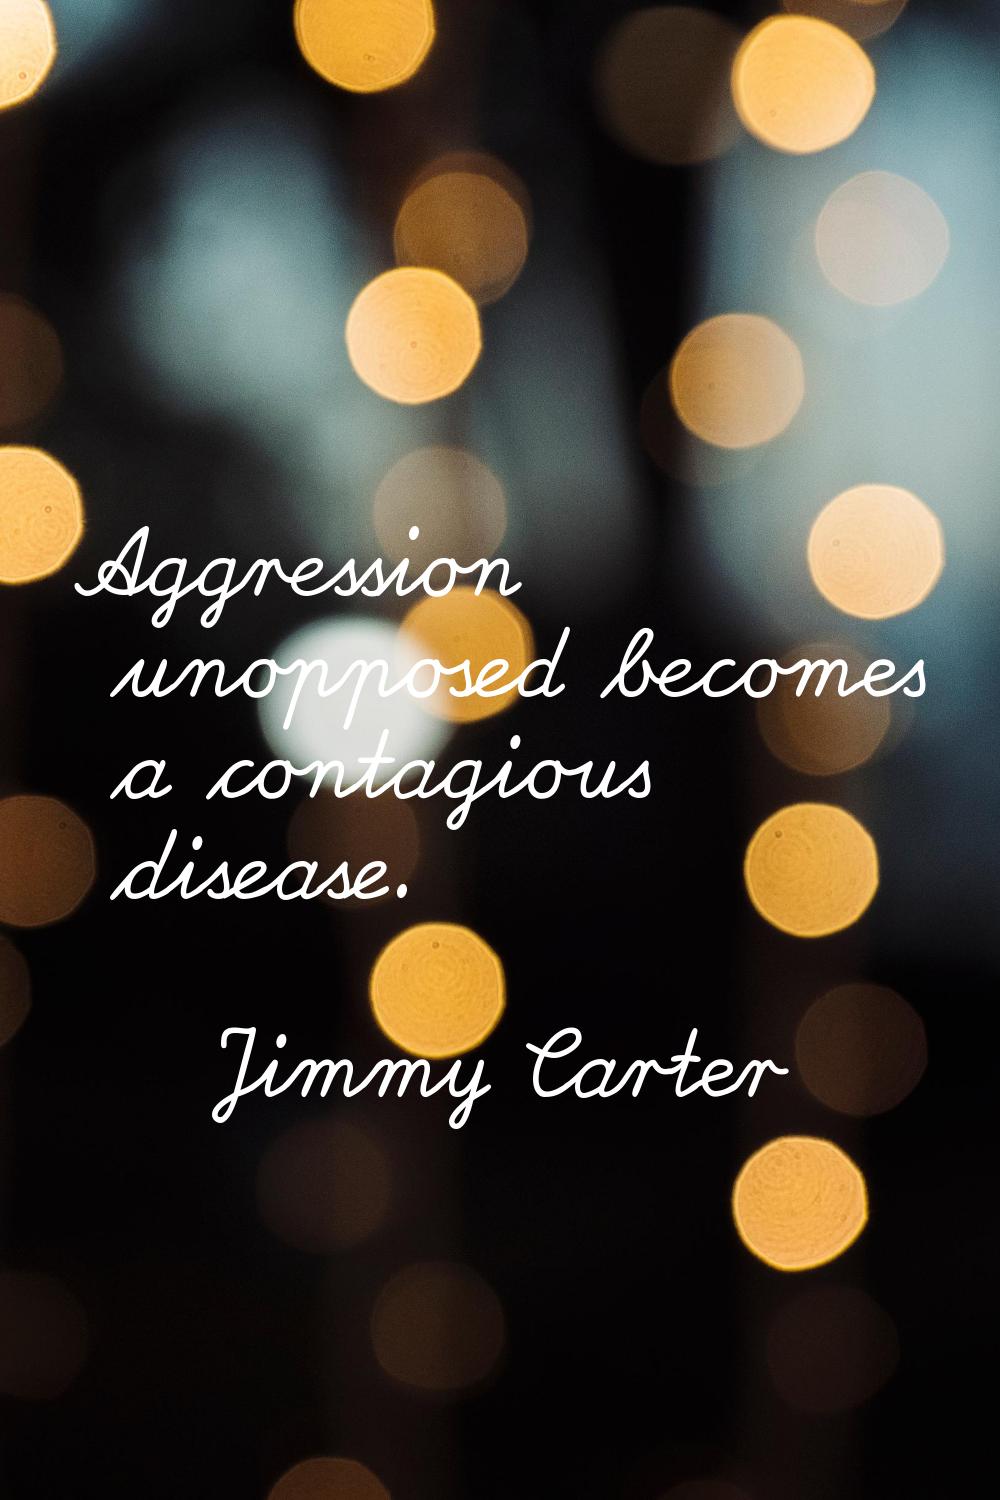 Aggression unopposed becomes a contagious disease.